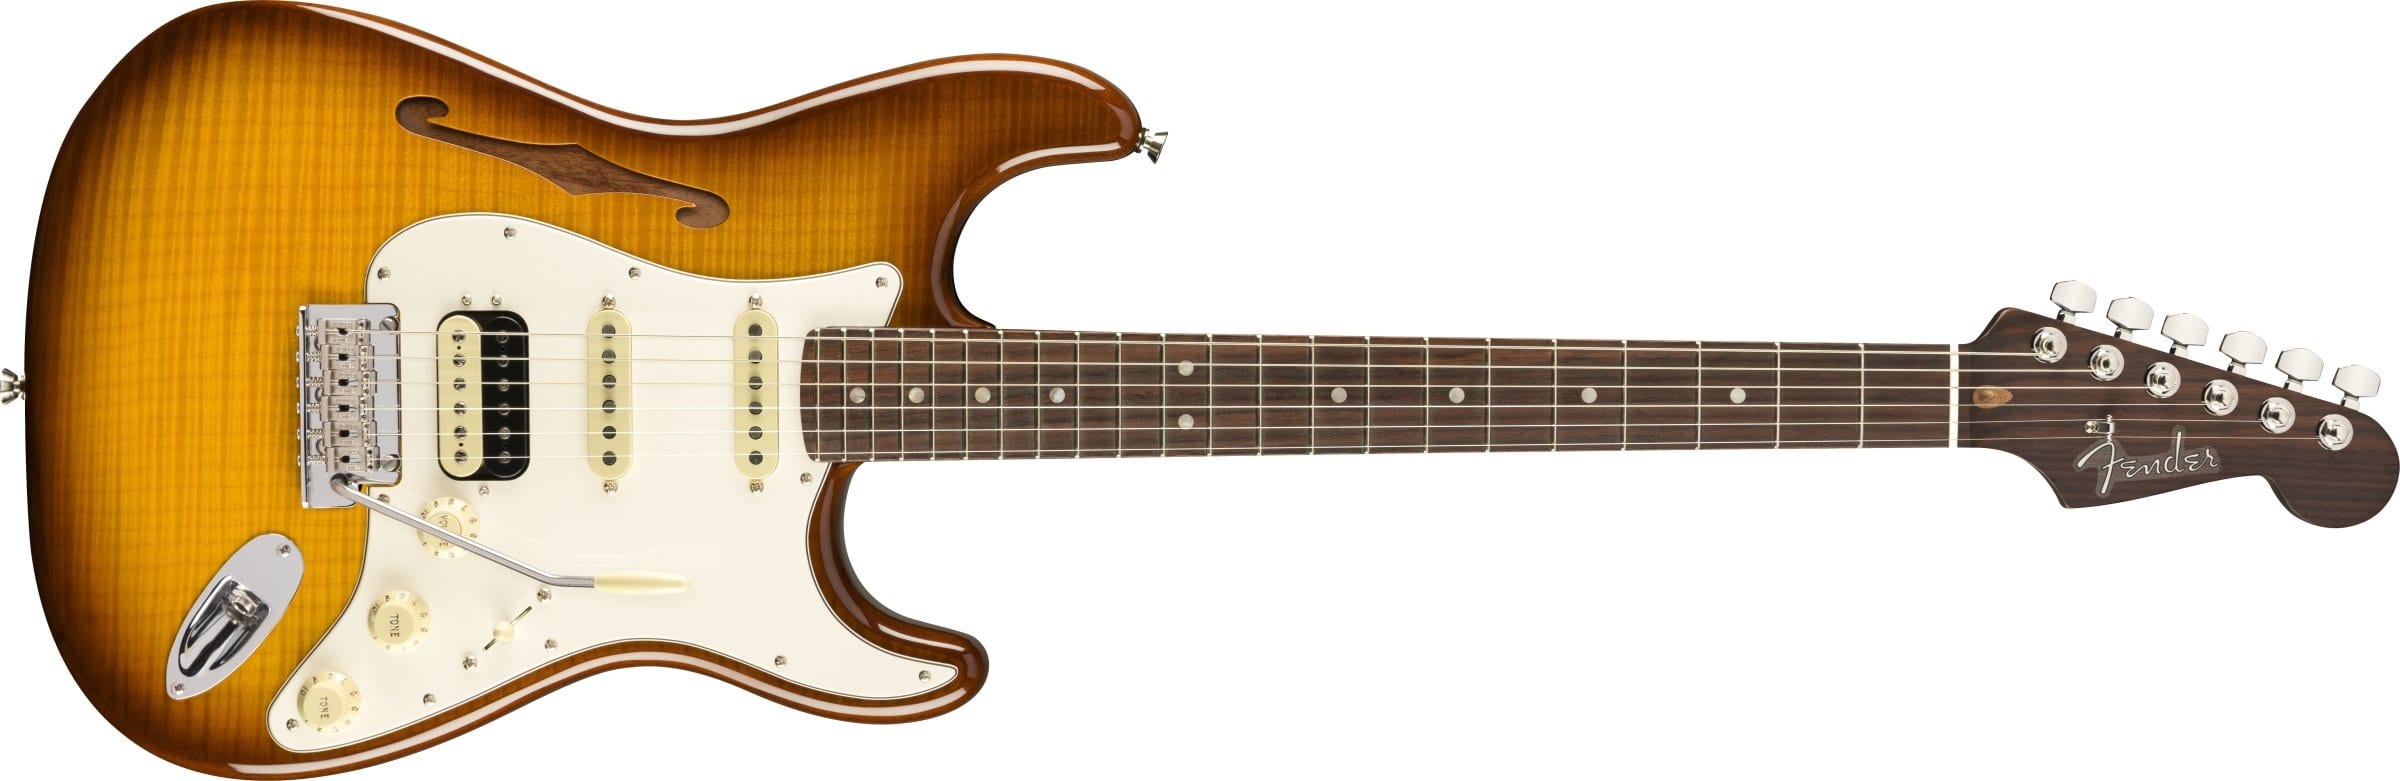 Fender Rarities Flame Maple Top Stratocaster front